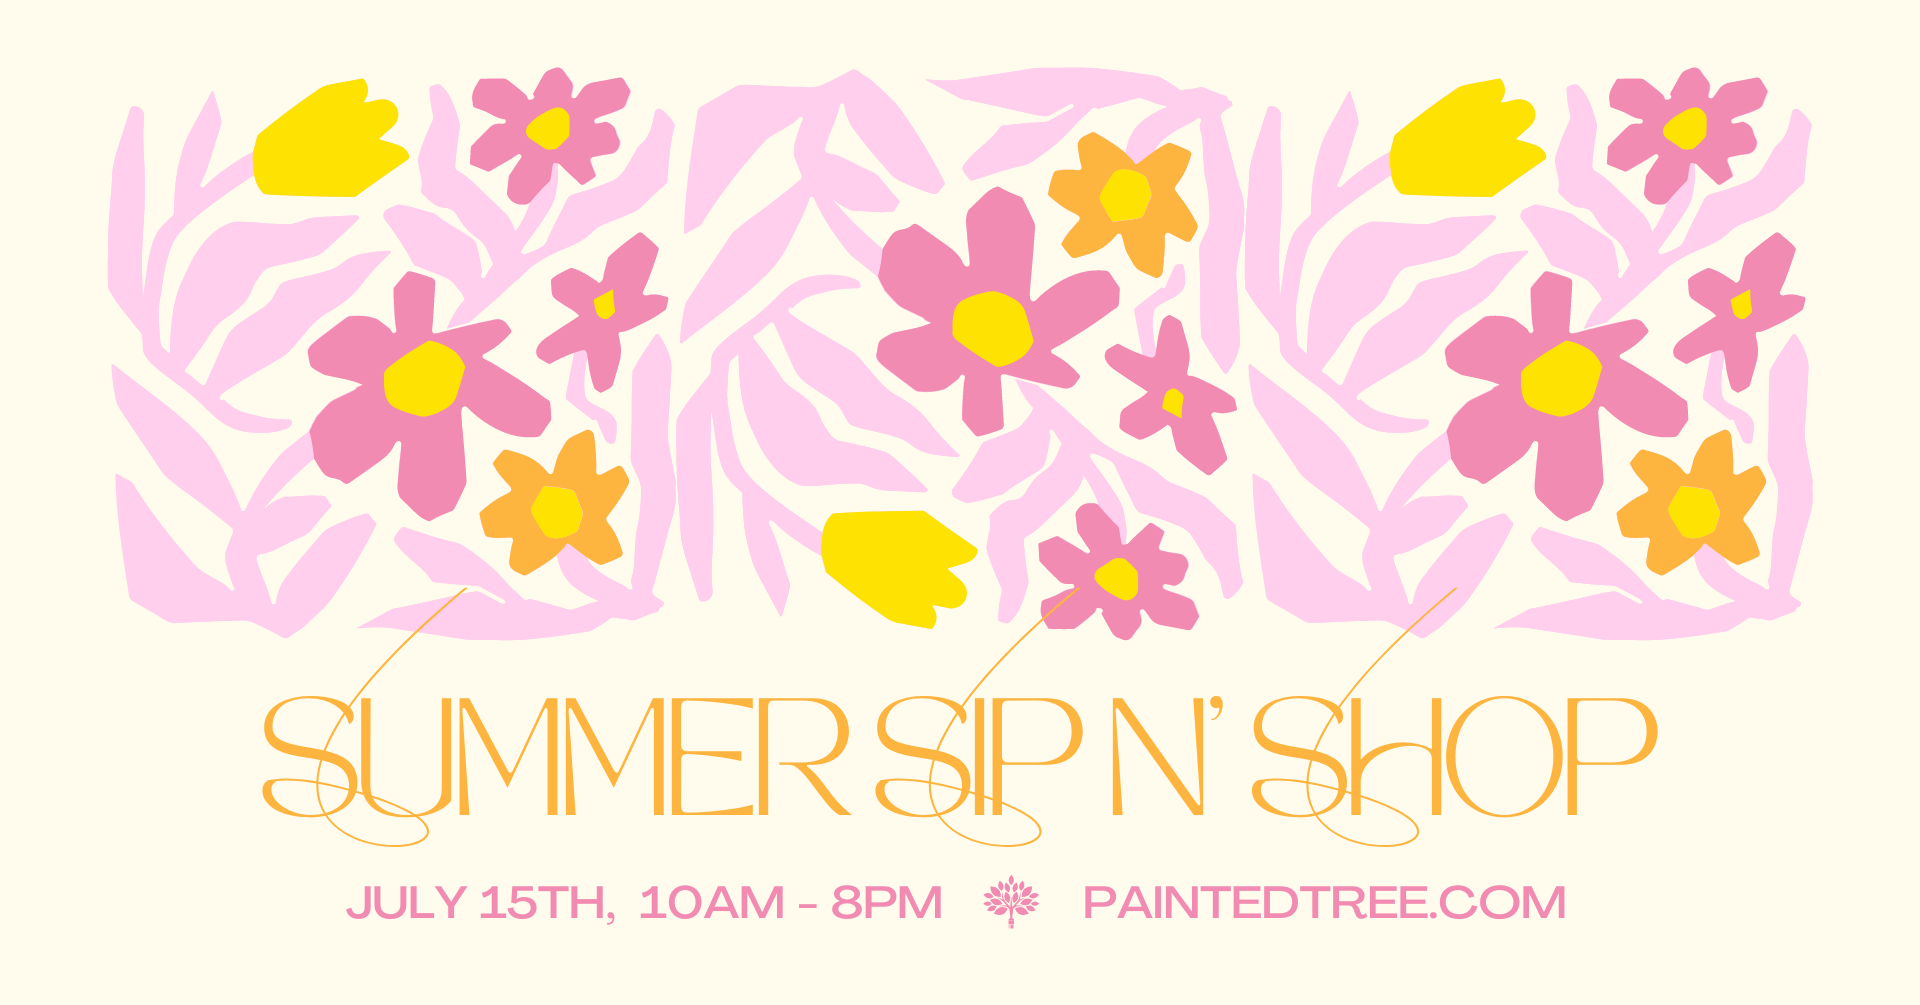 Summer Sip n' Shop | July 15th from 10am - 8pm